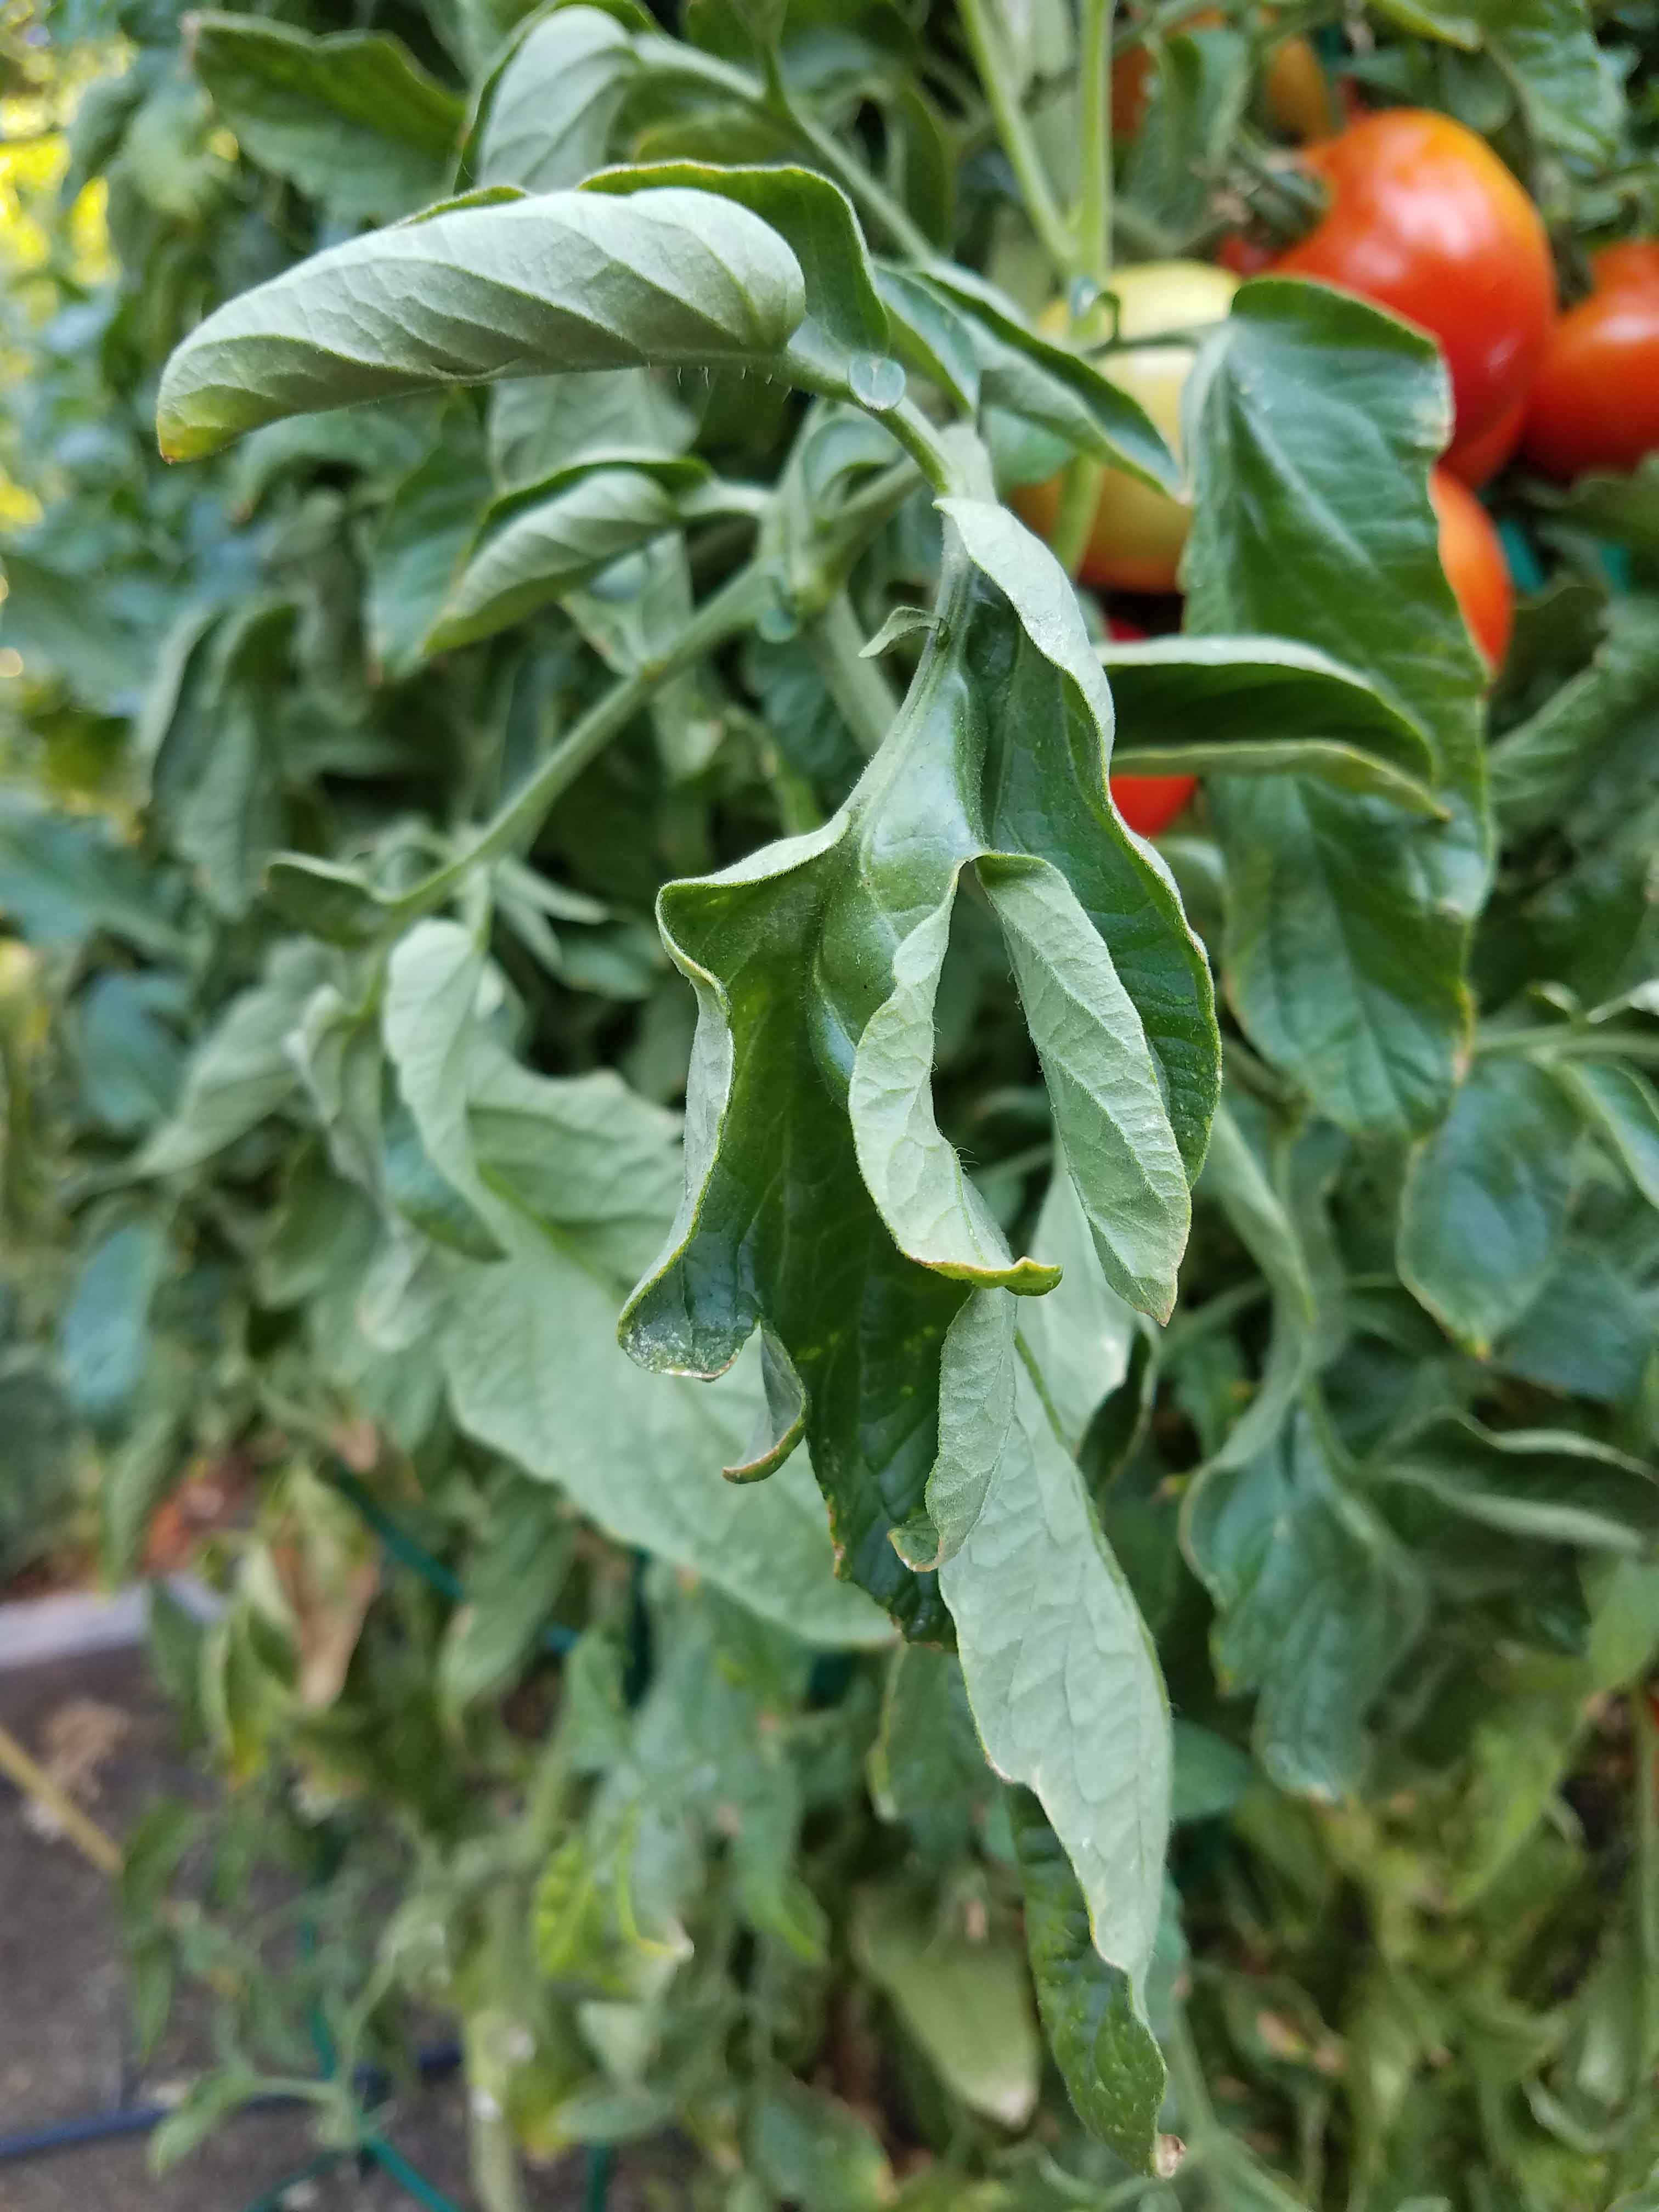 Are Tomatoes Feeling the Heat? - The Real Dirt Blog - ANR Blogs